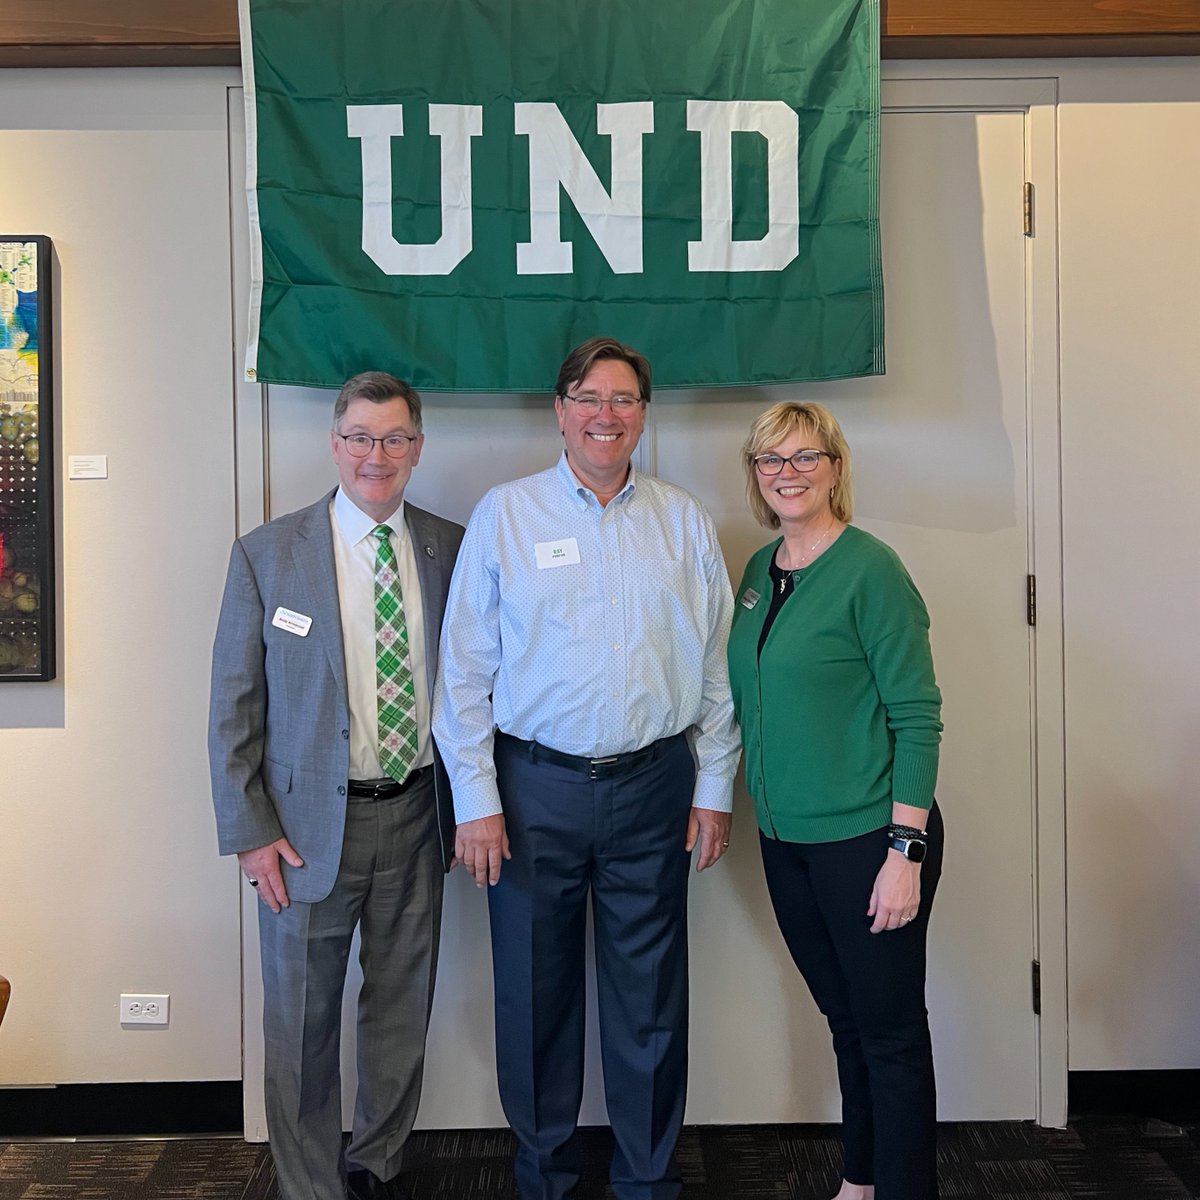 We had a wonderful time getting together with UND alumni and friends last Friday in Palo Alto. Thank you, Ray, '87, and Terrie Purpur for hosting! ☀️🌳 #UNDalumni #UNDproud